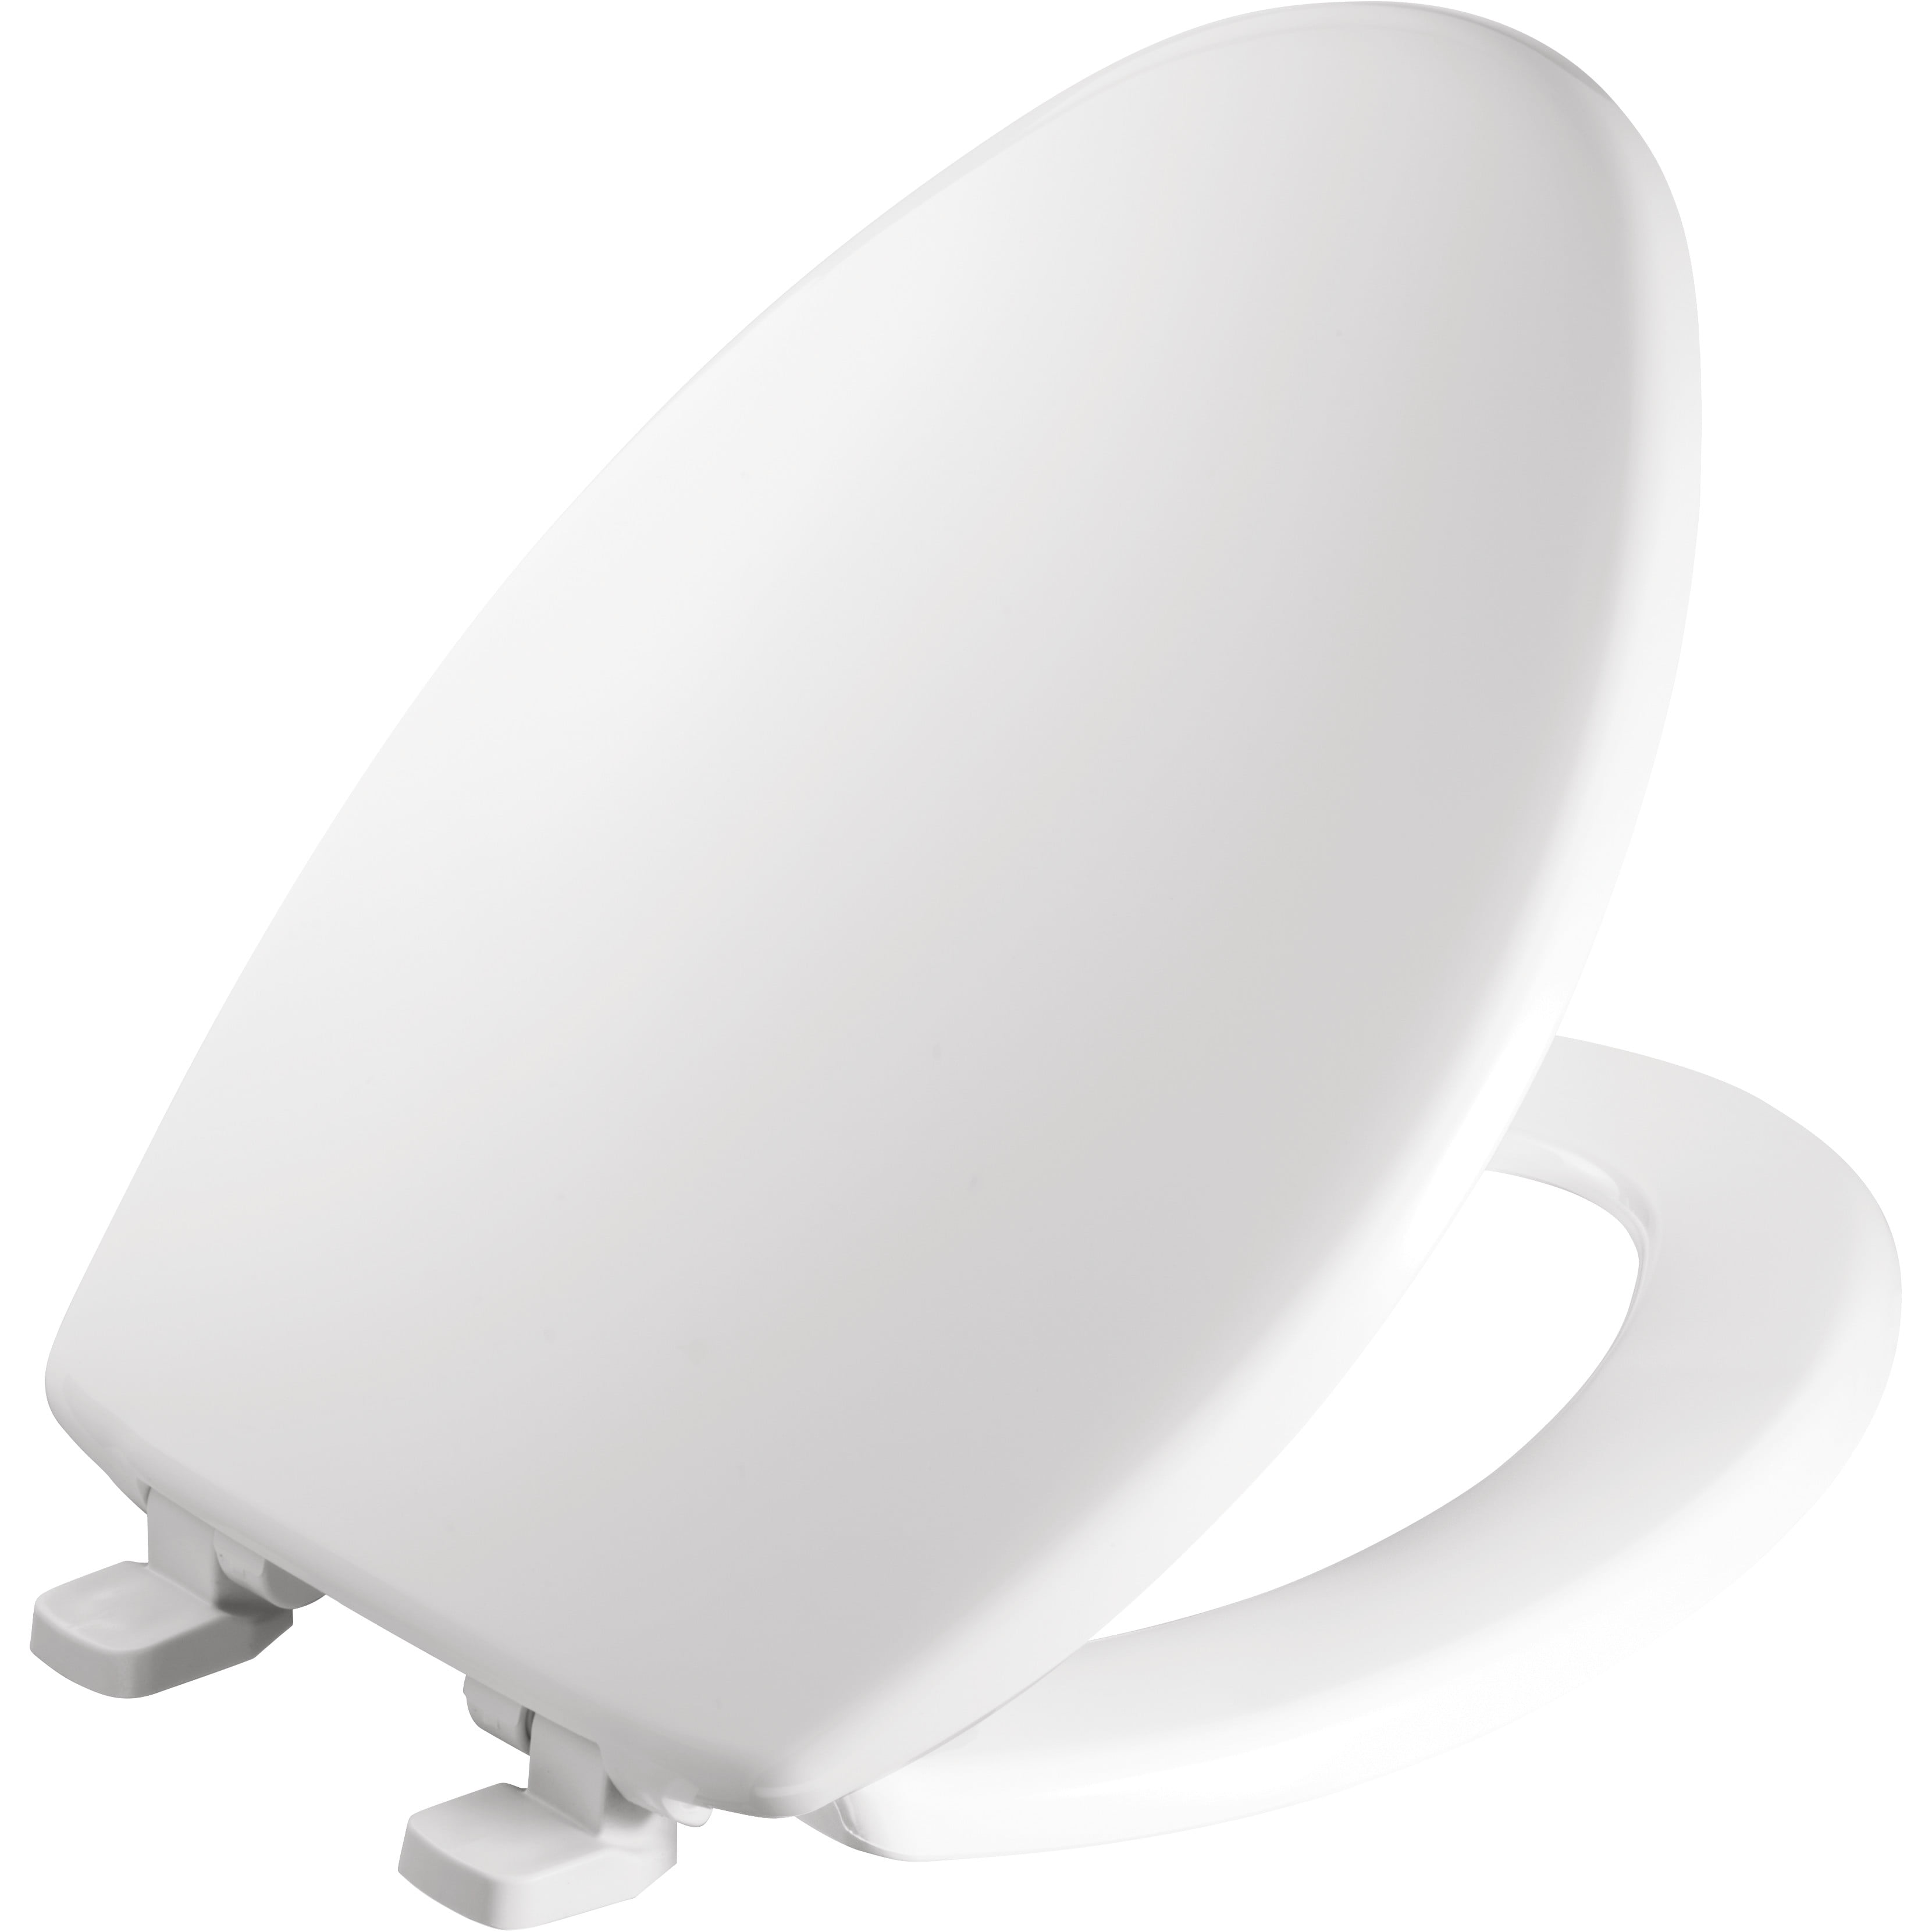 Mayfair Just Lift Slow Close Elongated Plastic Toilet Seat In White